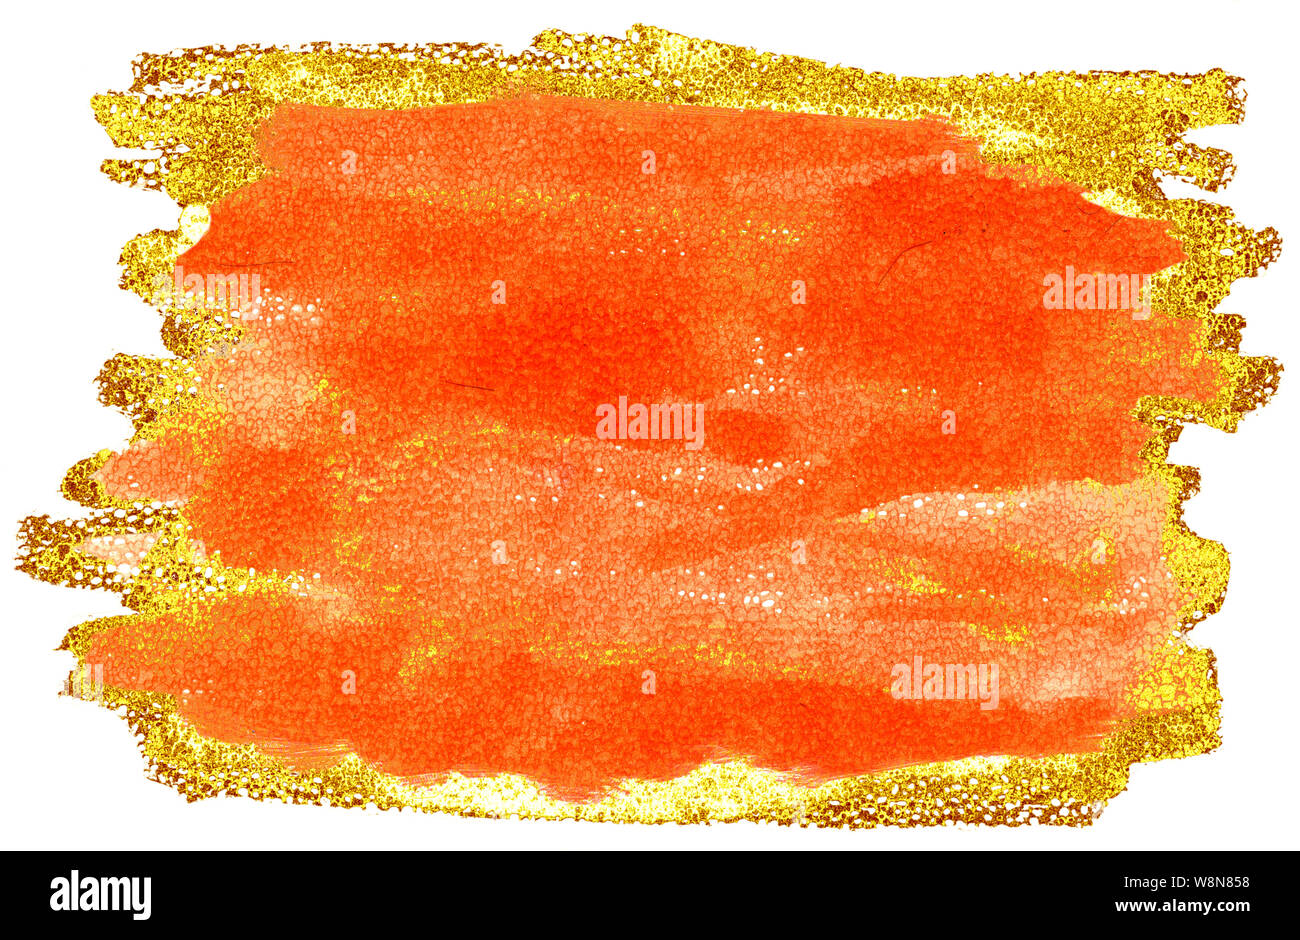 Orange and gold watercolor brush strokes isolated on white background Stock Photo